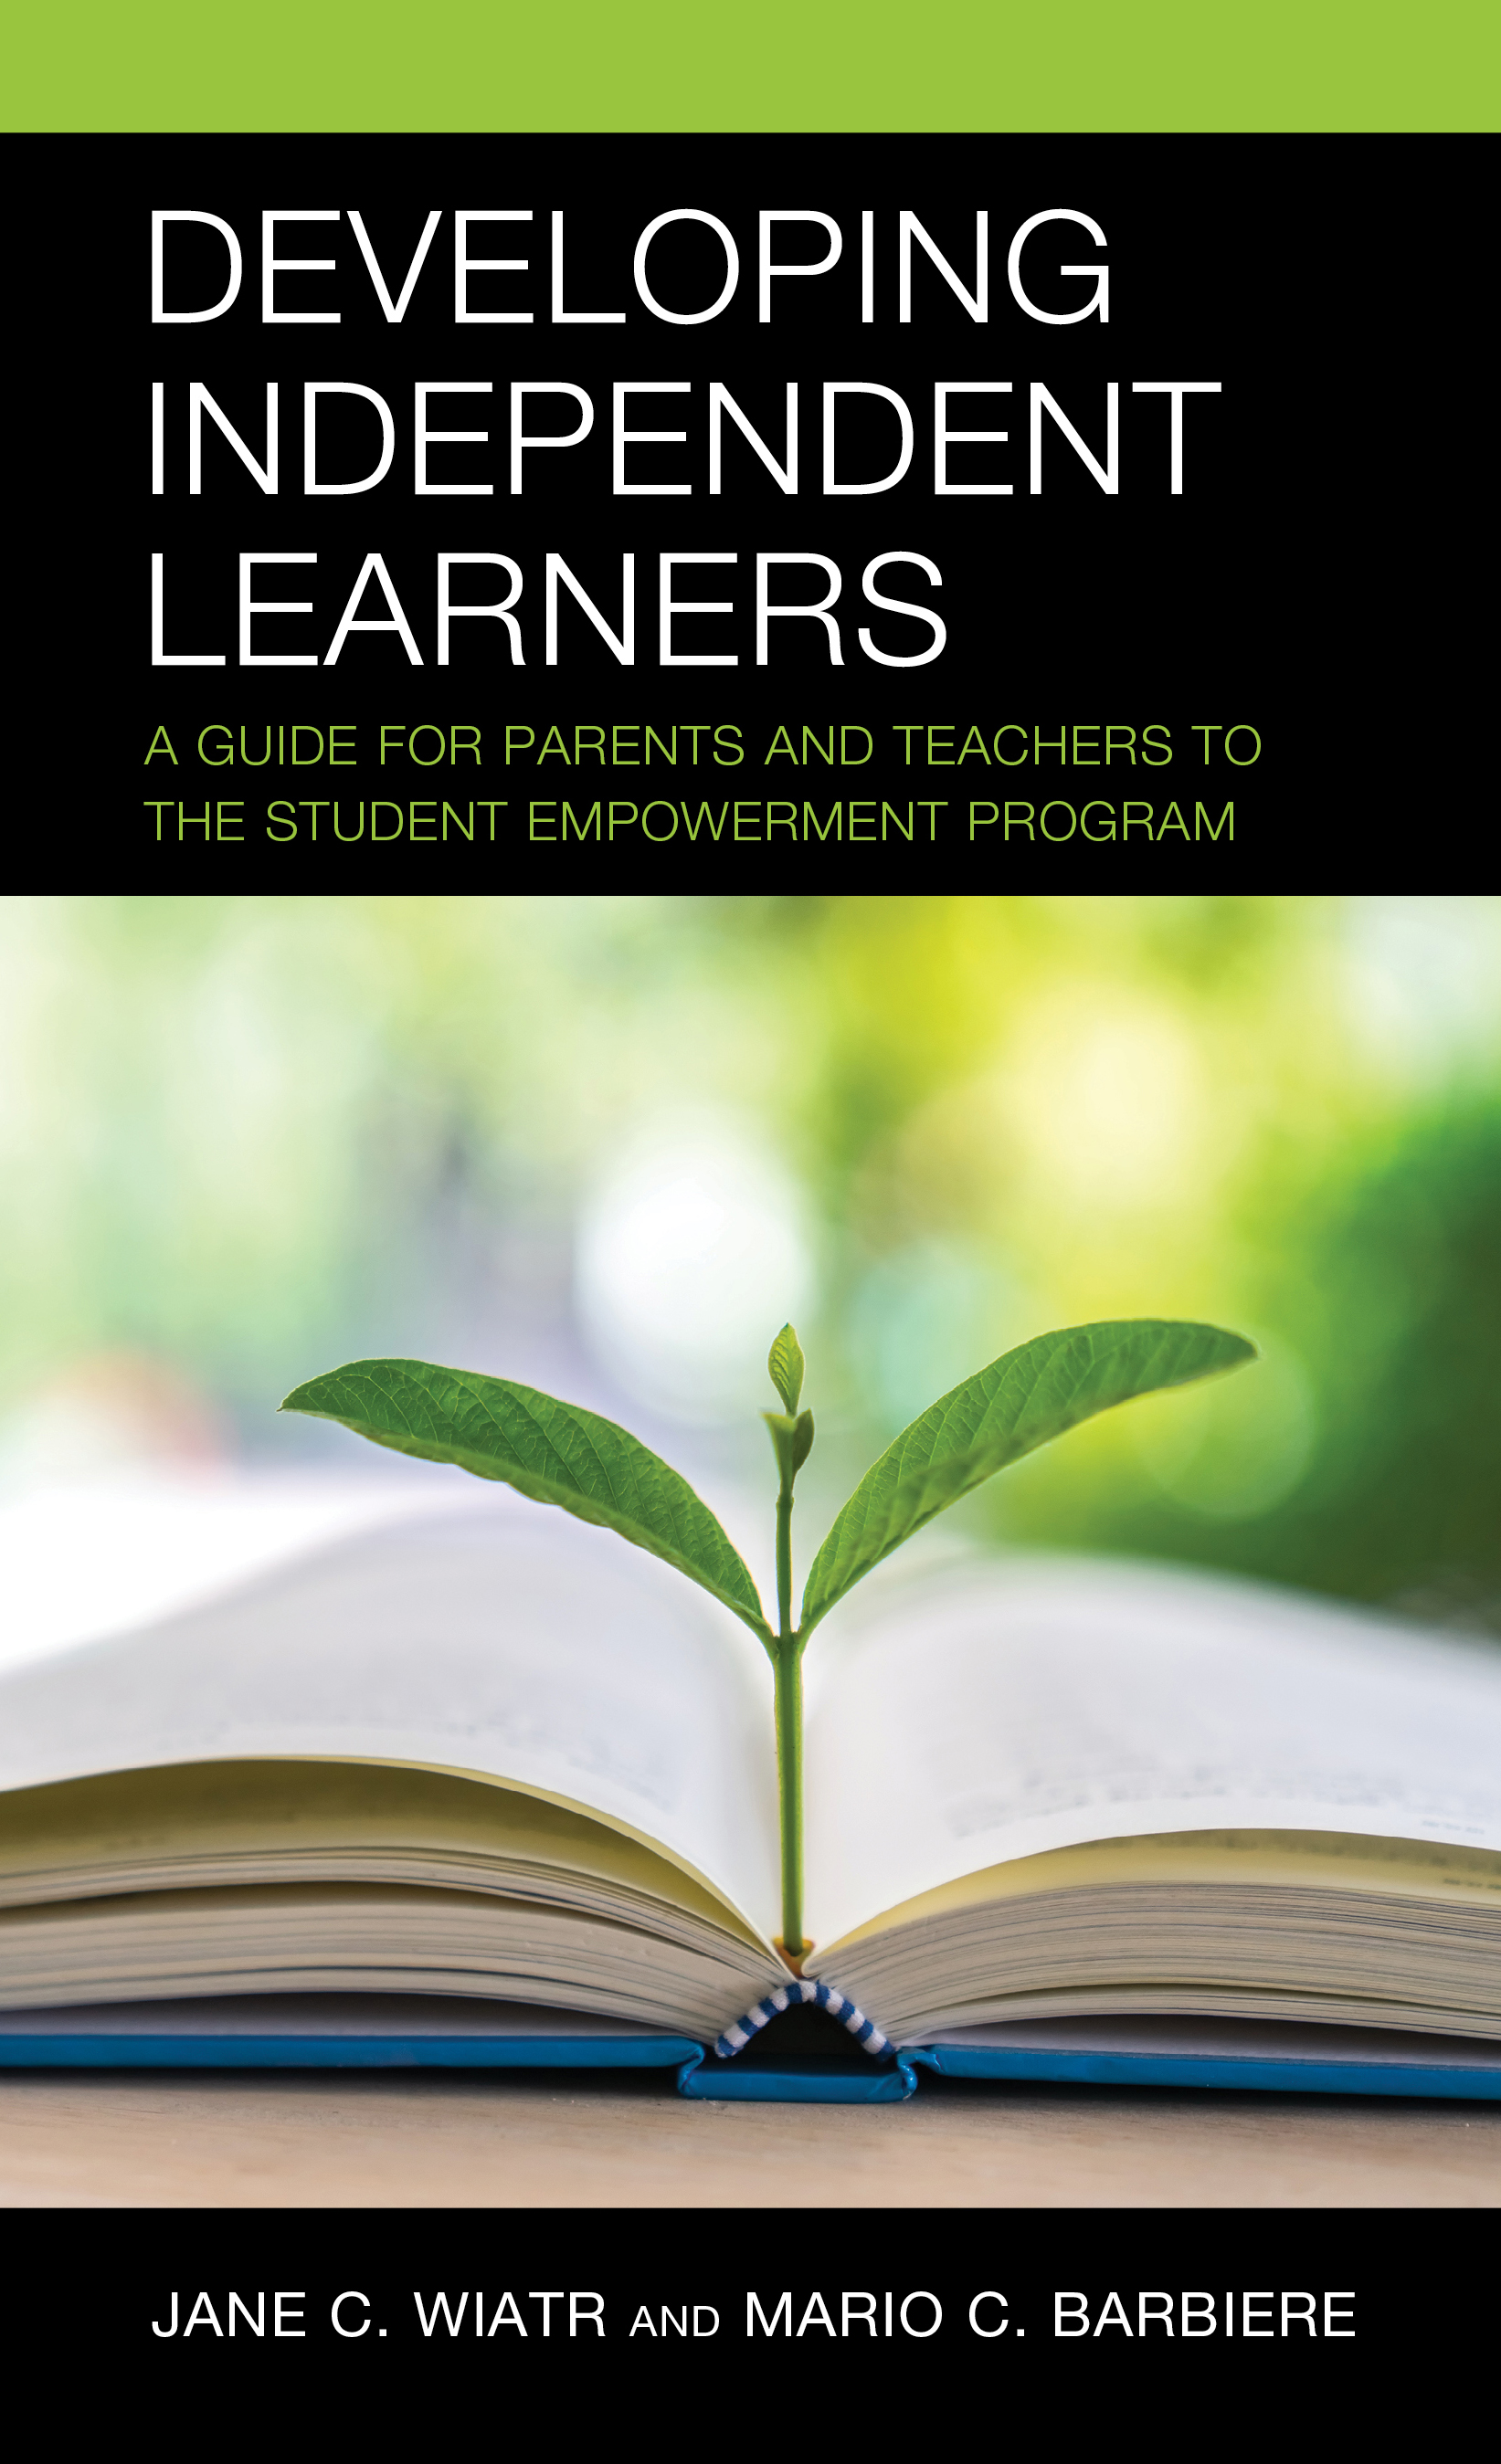 Developing Independent Learners: A Guide for Parents and Teachers to the Student Empowerment Program